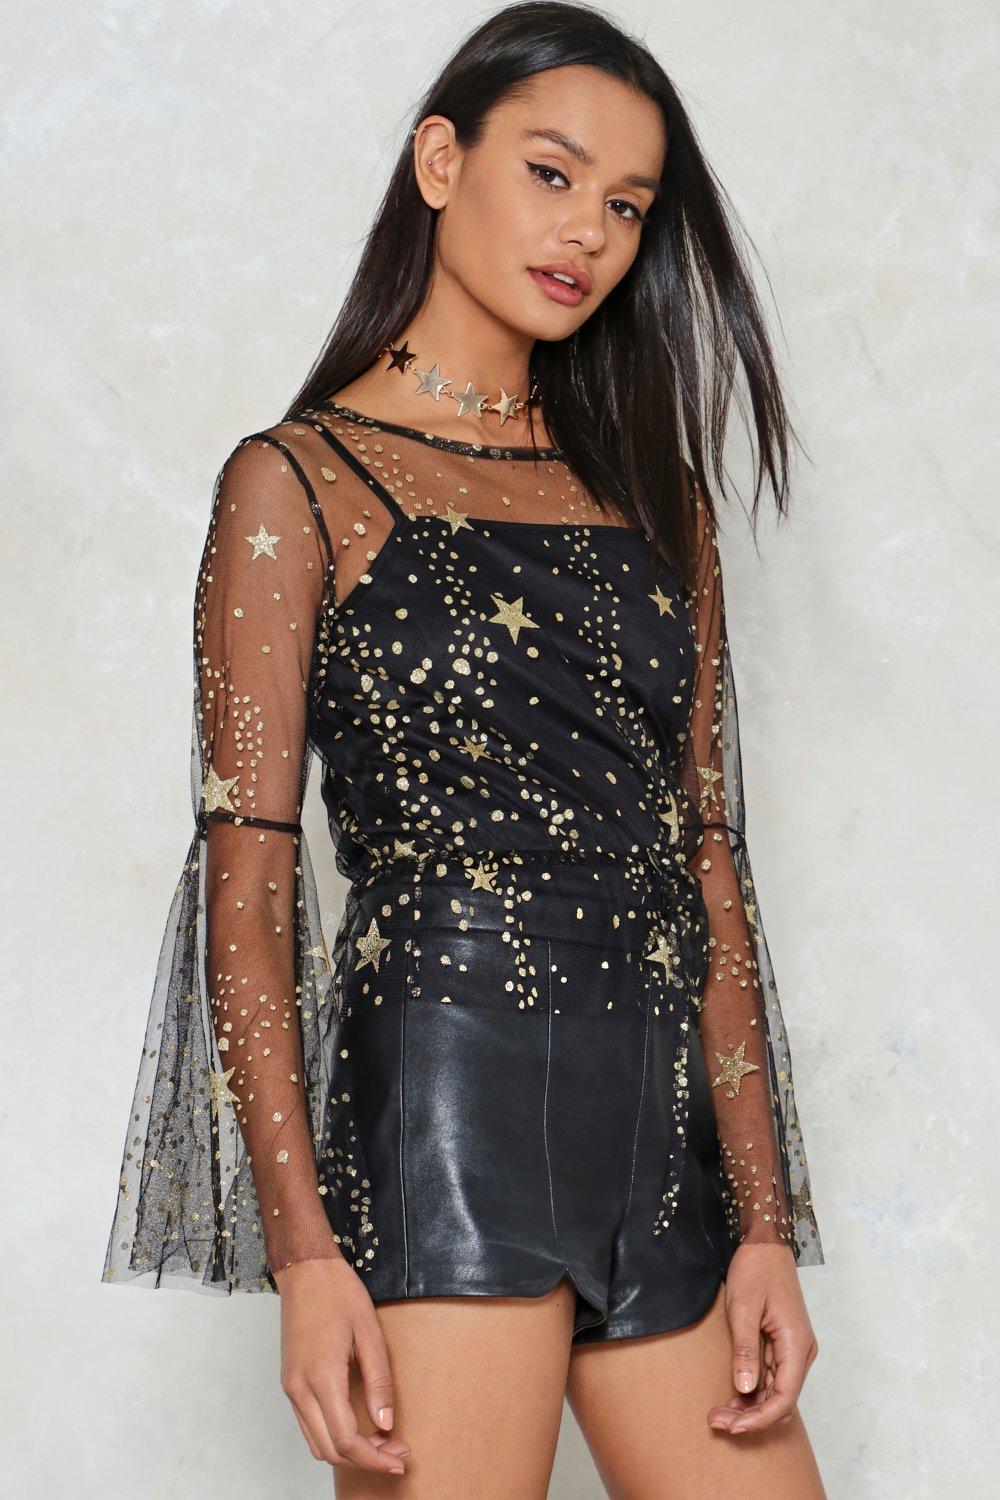 sheer top with stars